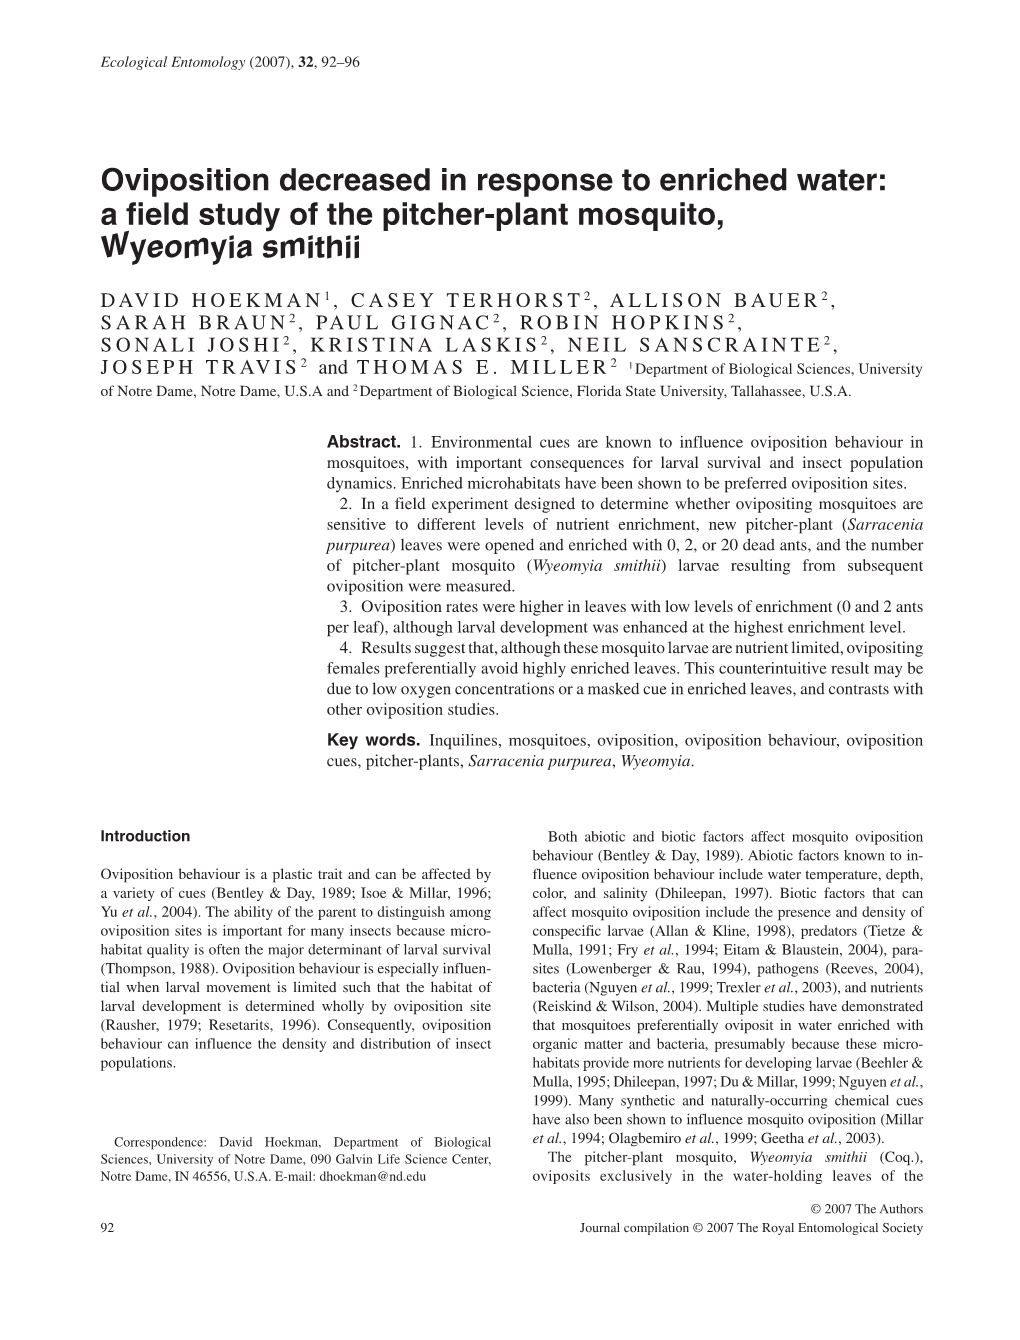 Oviposition Decreased in Response to Enriched Water: a Field Study of the Pitcher-Plant Mosquito, Wyeomyia Smithii